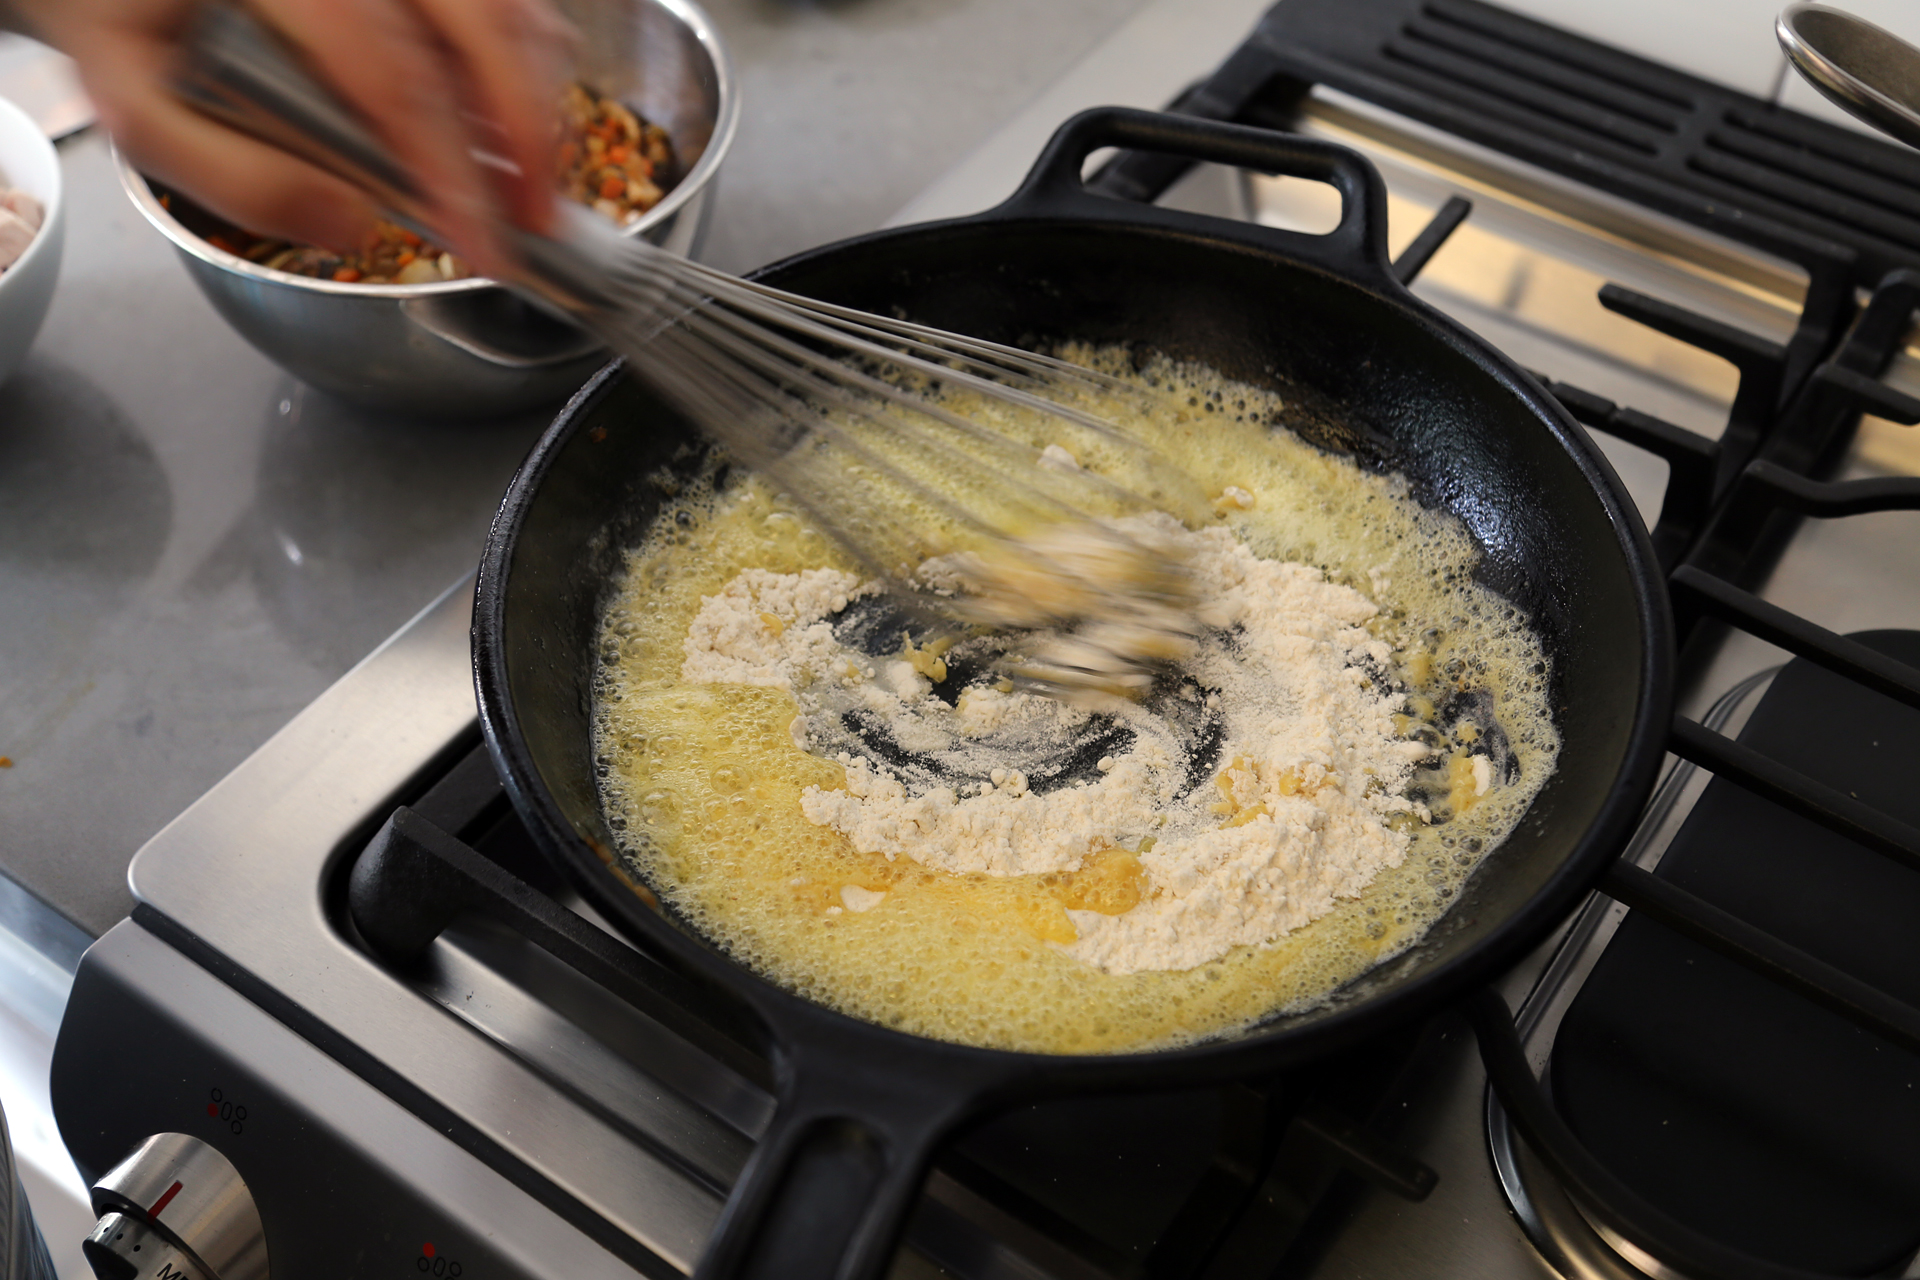 Add the remaining 5 tbsp butter to the frying pan. When melted, sprinkle in the flour. 